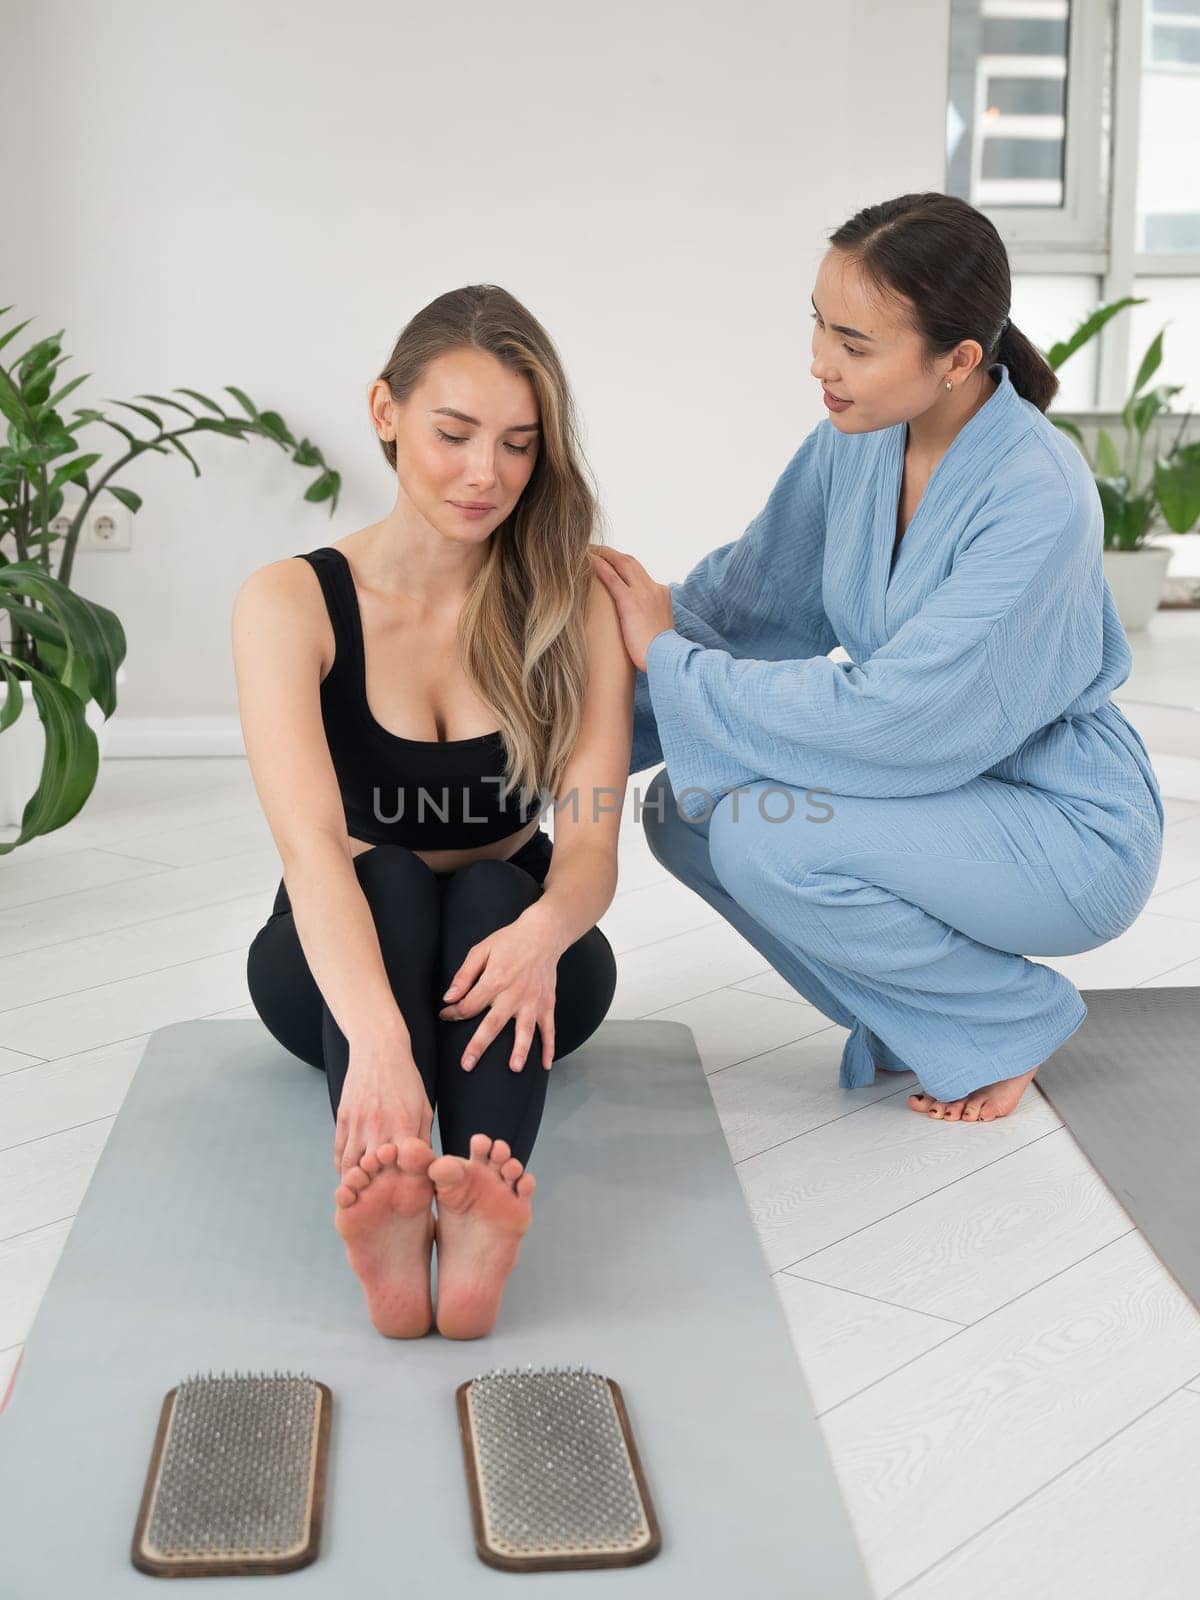 The therapist supports the client after standing on the sadhu boards. Nailing practice